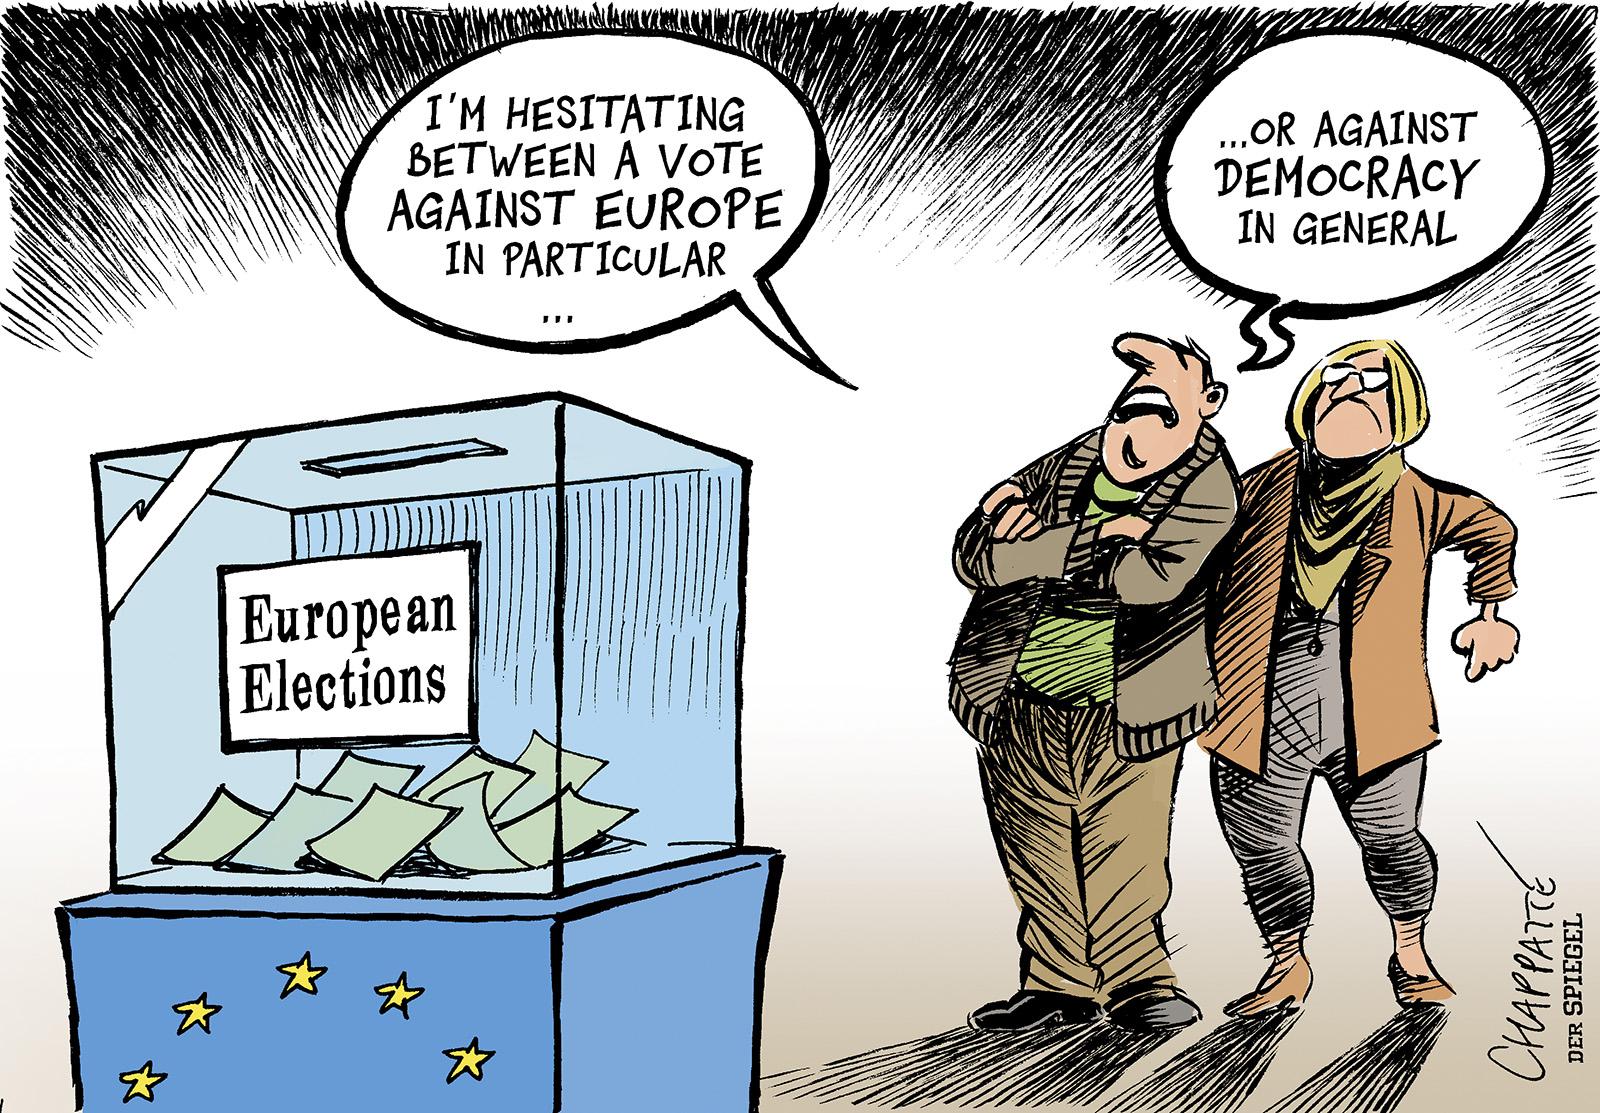 On the eve of European elections